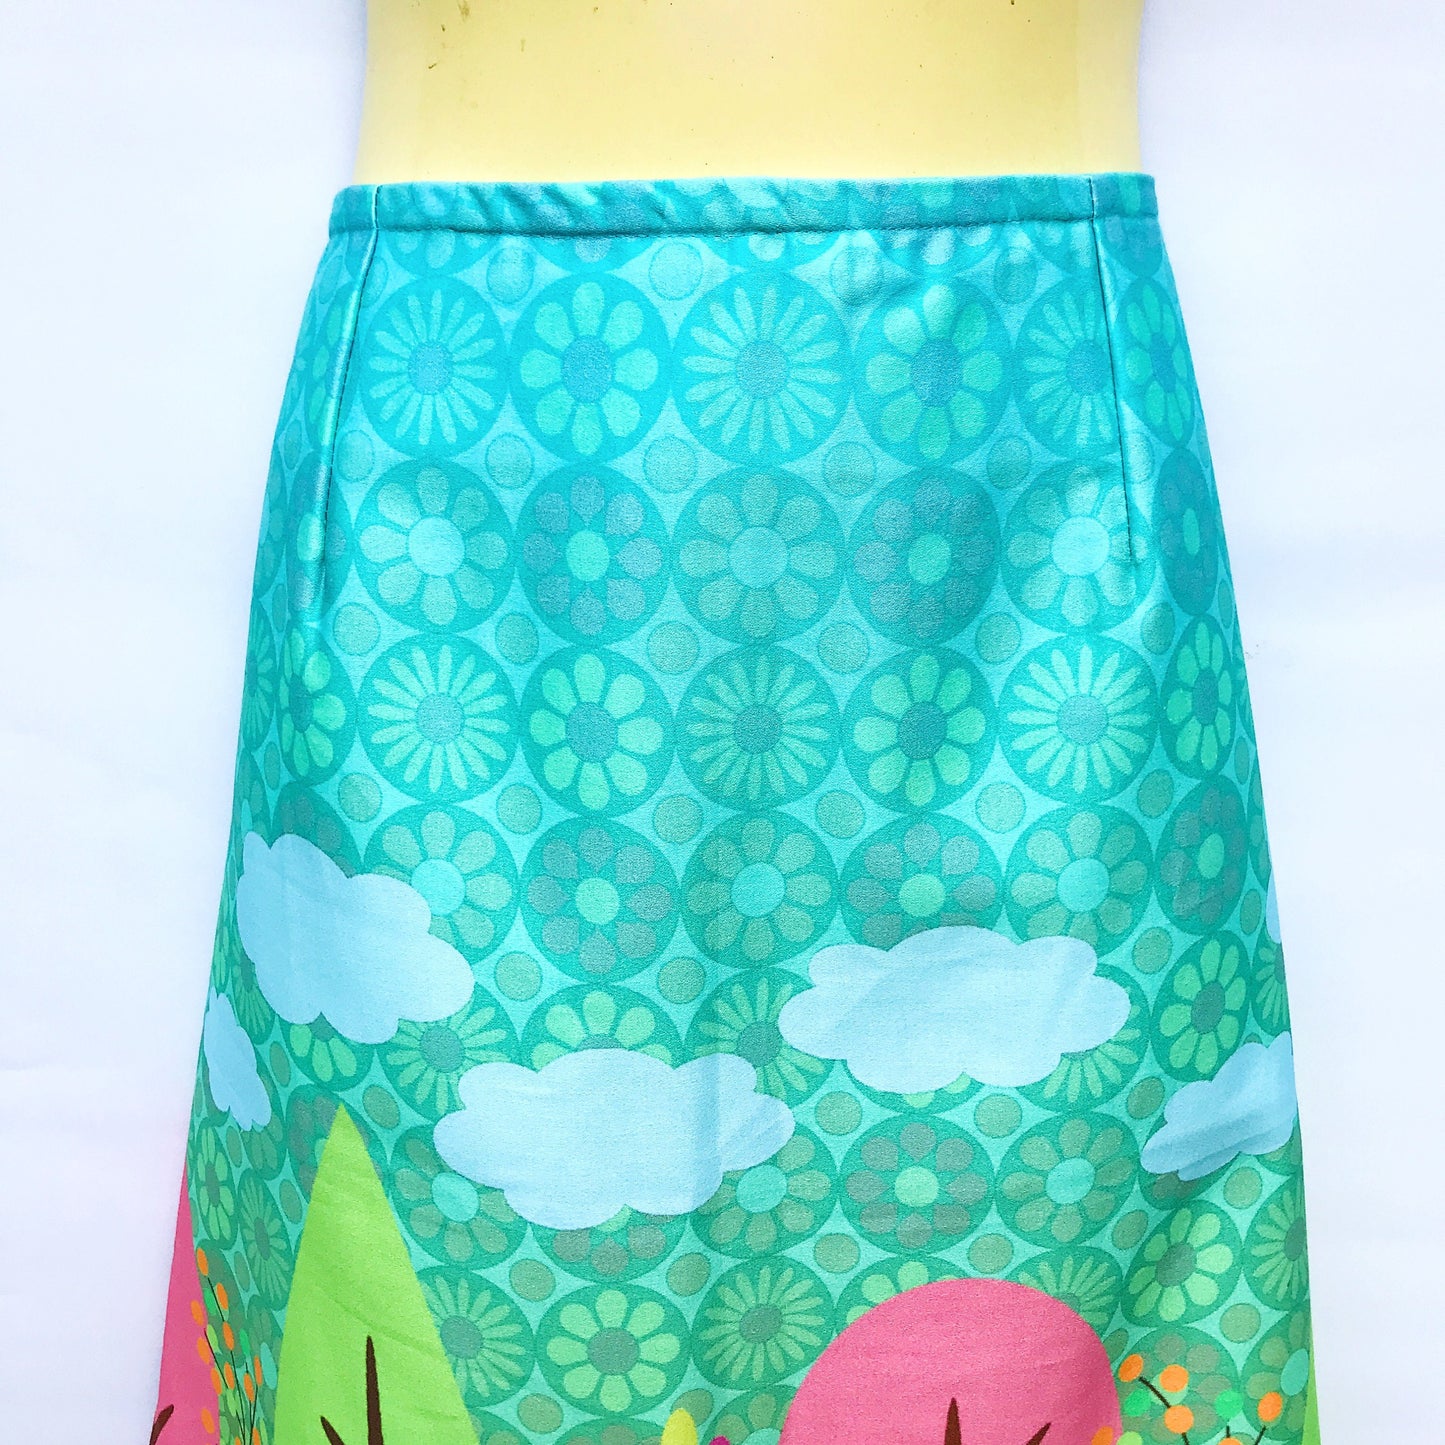 Ladies A-line Skirt - blue woodland animals - sizes 8 -24 avail